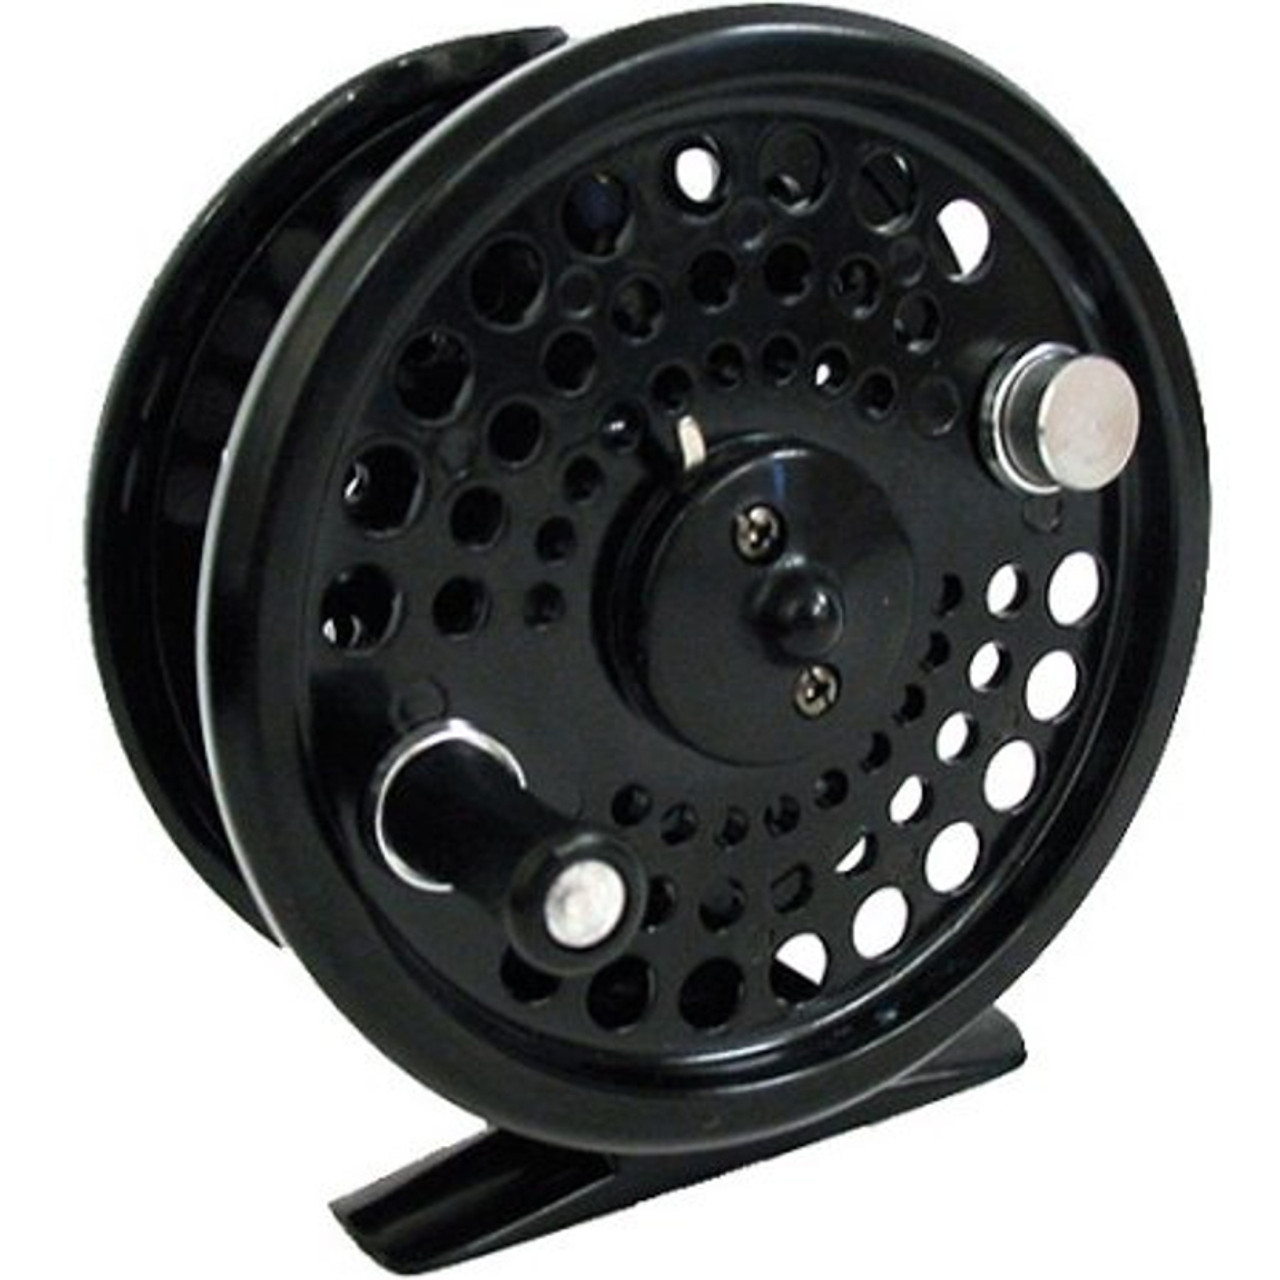 Eagle Claw Black Eagle Fly Reel 5/6 WT, Be56